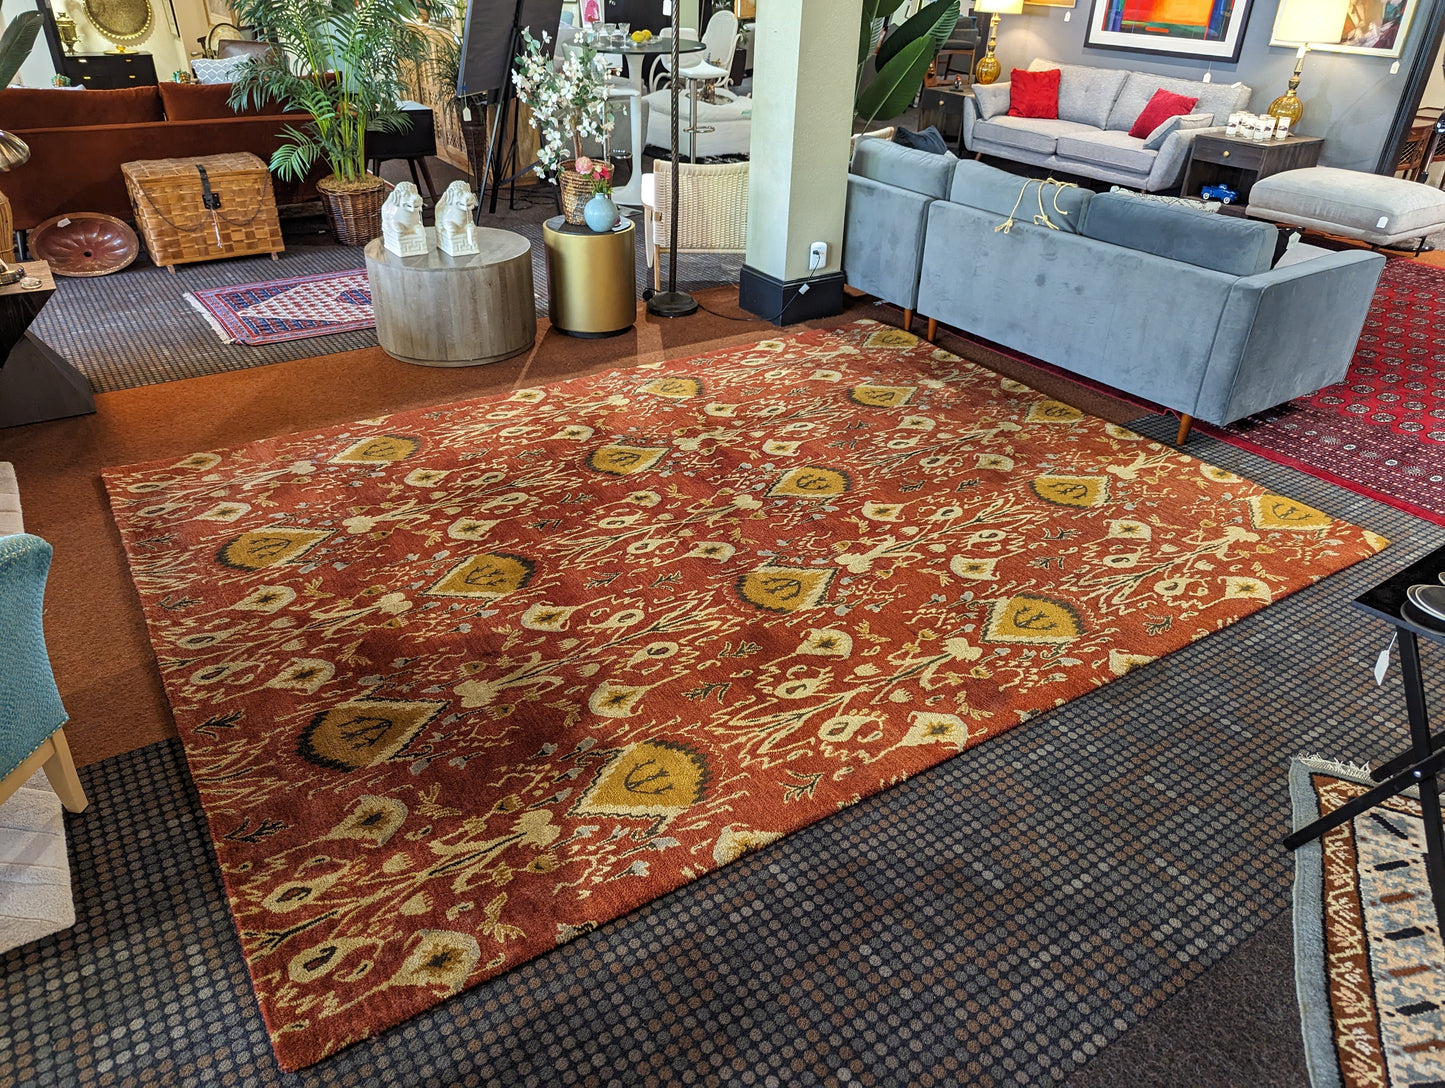 Nearly New Large Wool Area Rug with Various Warm Tones and Semi Floral Motifs 9'x12'